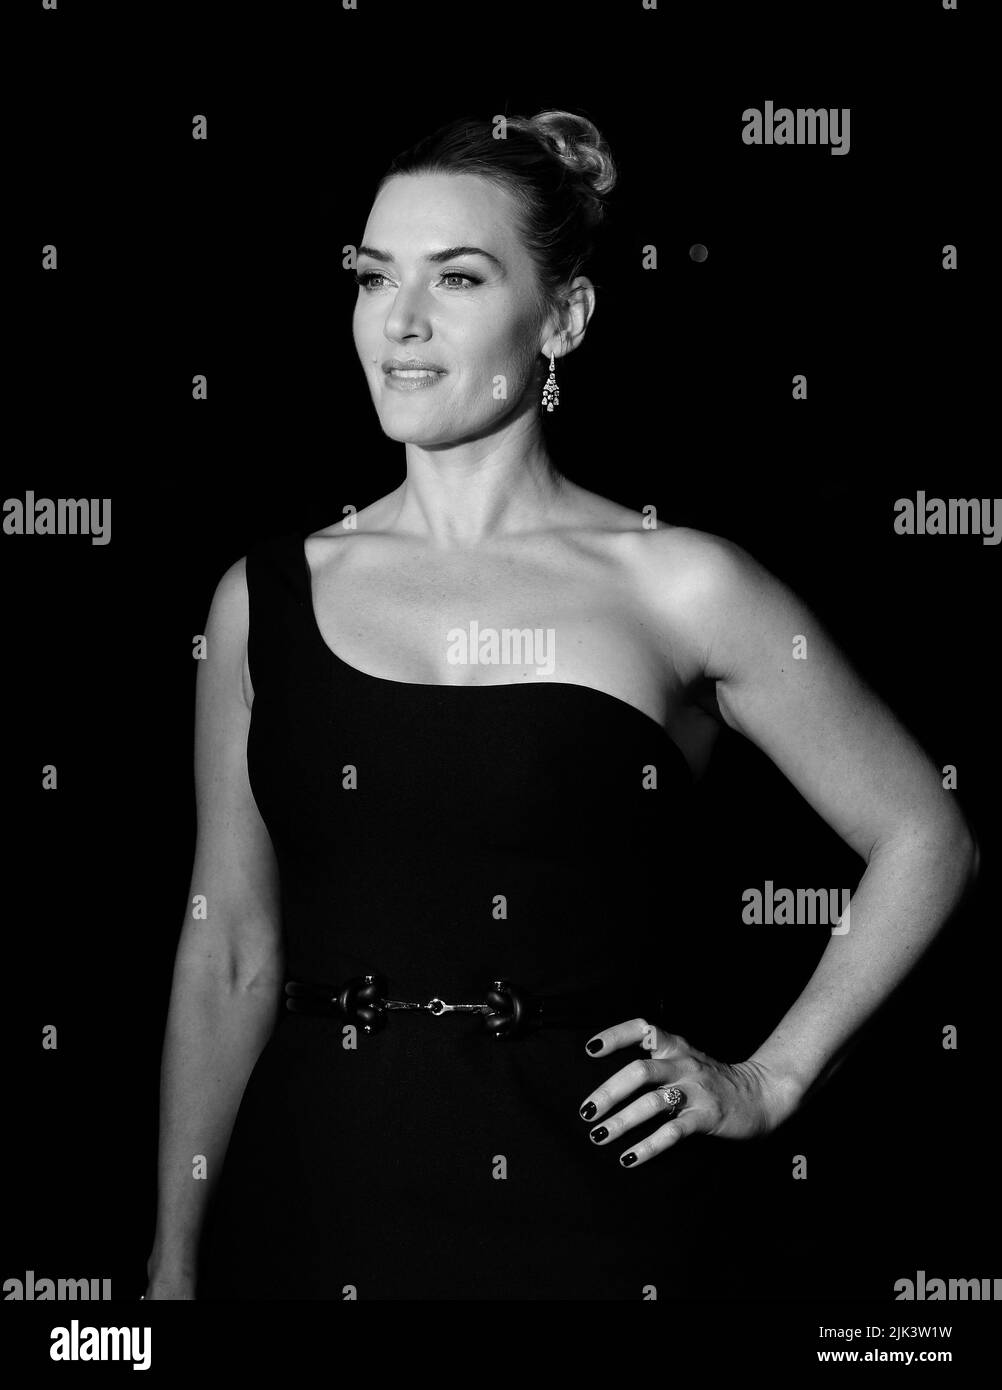 London, UK, 18th Oct 2015: Kate Winslet attends the Steve Jobs premiere and closing night gala, 59th BFI London Film Festival at the Odeon Leicester Square in London., , , , , , , , ©-A, ÈyC, , , , , (,C, , , , , , , , 1²-B, H, , , , , , , Í, , , , , , , , , ¨{C É·-C, ØxC, , , , n, , , ¸1C, , , , , , , , Ò@¸-D, (yC, , , , t, , , 8ÿE, , , , , , , , , ½-¨E,  yC0, , , , , , , 81C, , , , , , , , °, -*±F, hzC, , , , , , , h2C, , , , , , , , , -'ºG, , , , , i, , , , ®, , , è1C, , , , , , , ,  ÂÛ- ÄH, `xC,  Stock Photo